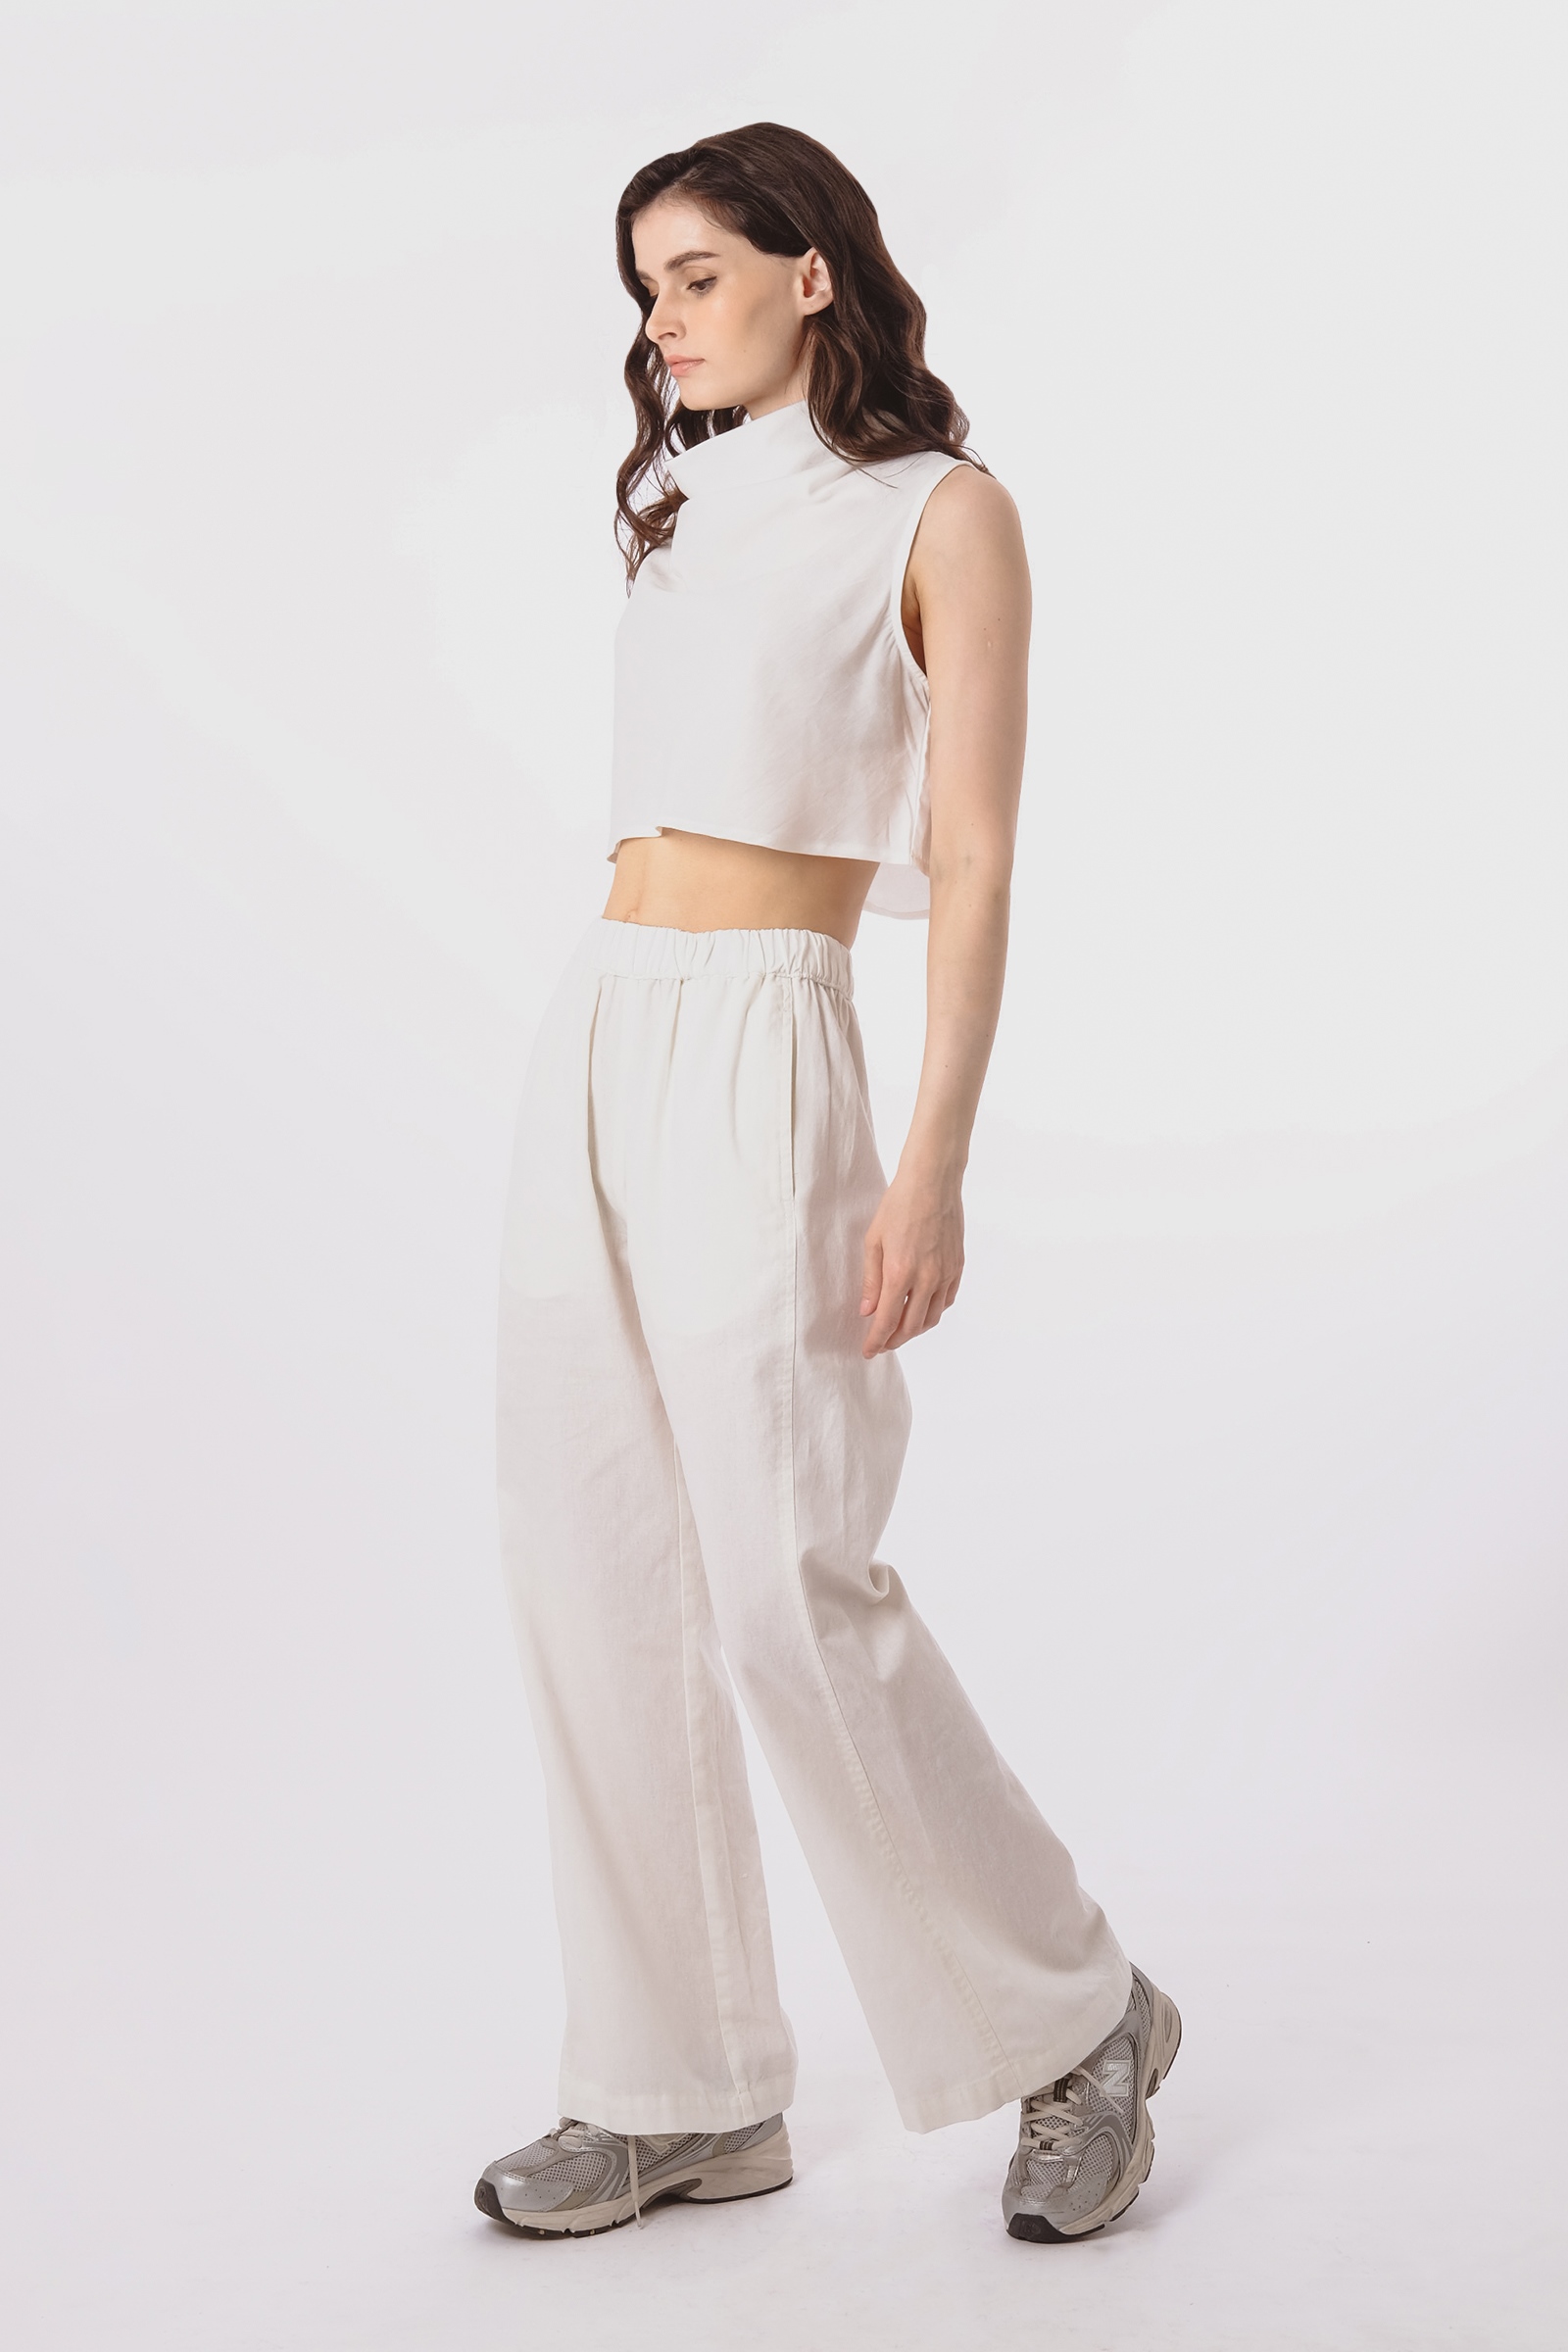 Picture of Malina Crop Top Marshmallow